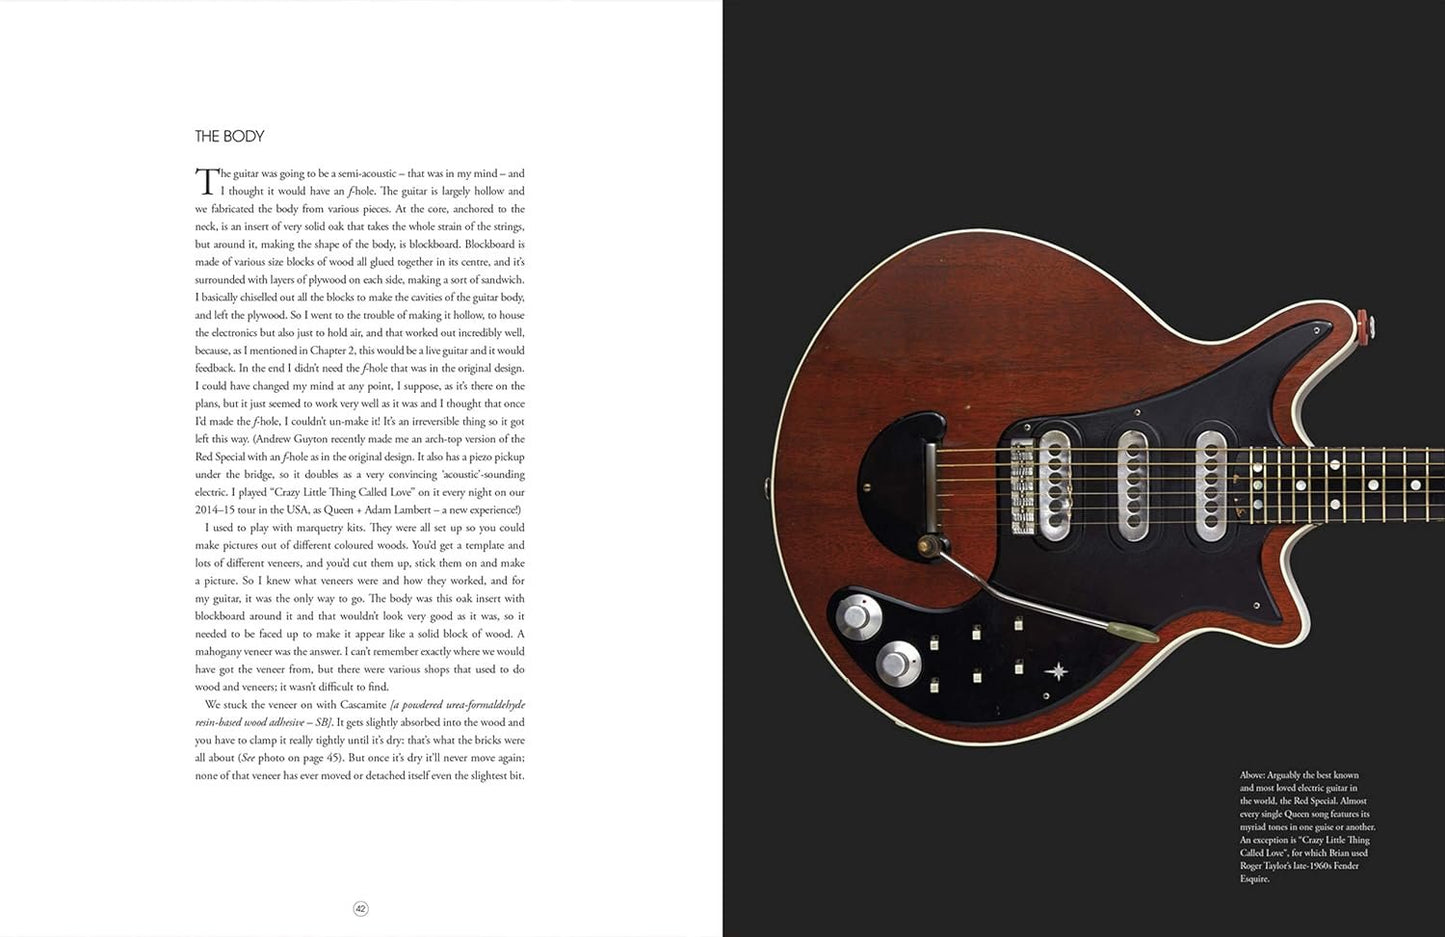 Brian May's Red Special: The Story of the Home-Made Guitar that Rocked Queen and the World